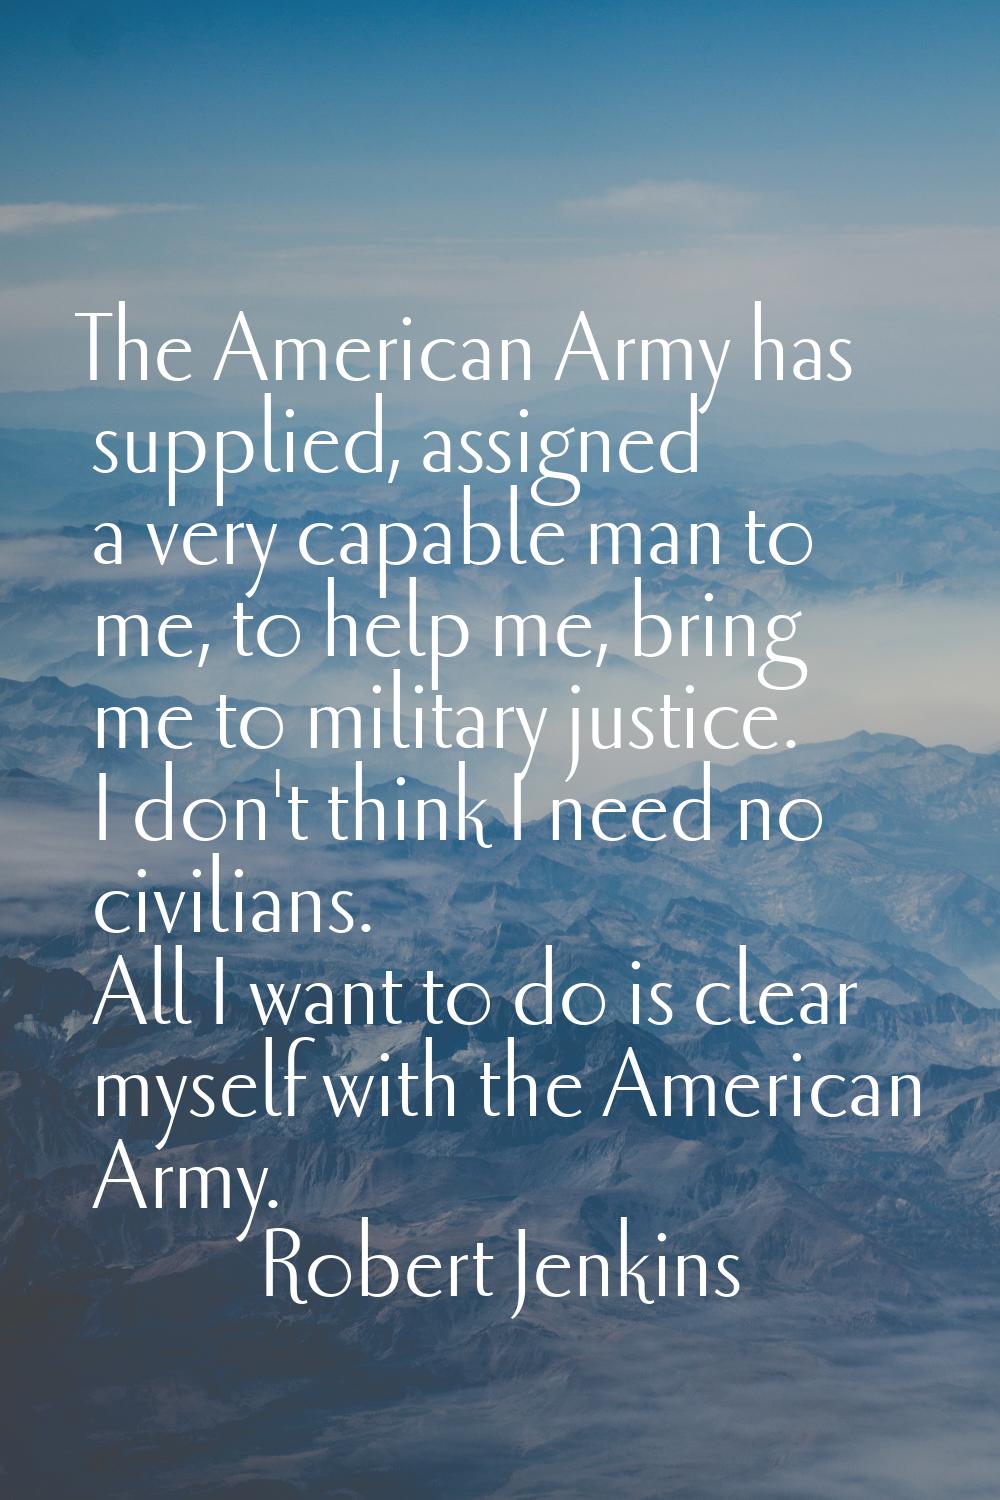 The American Army has supplied, assigned a very capable man to me, to help me, bring me to military